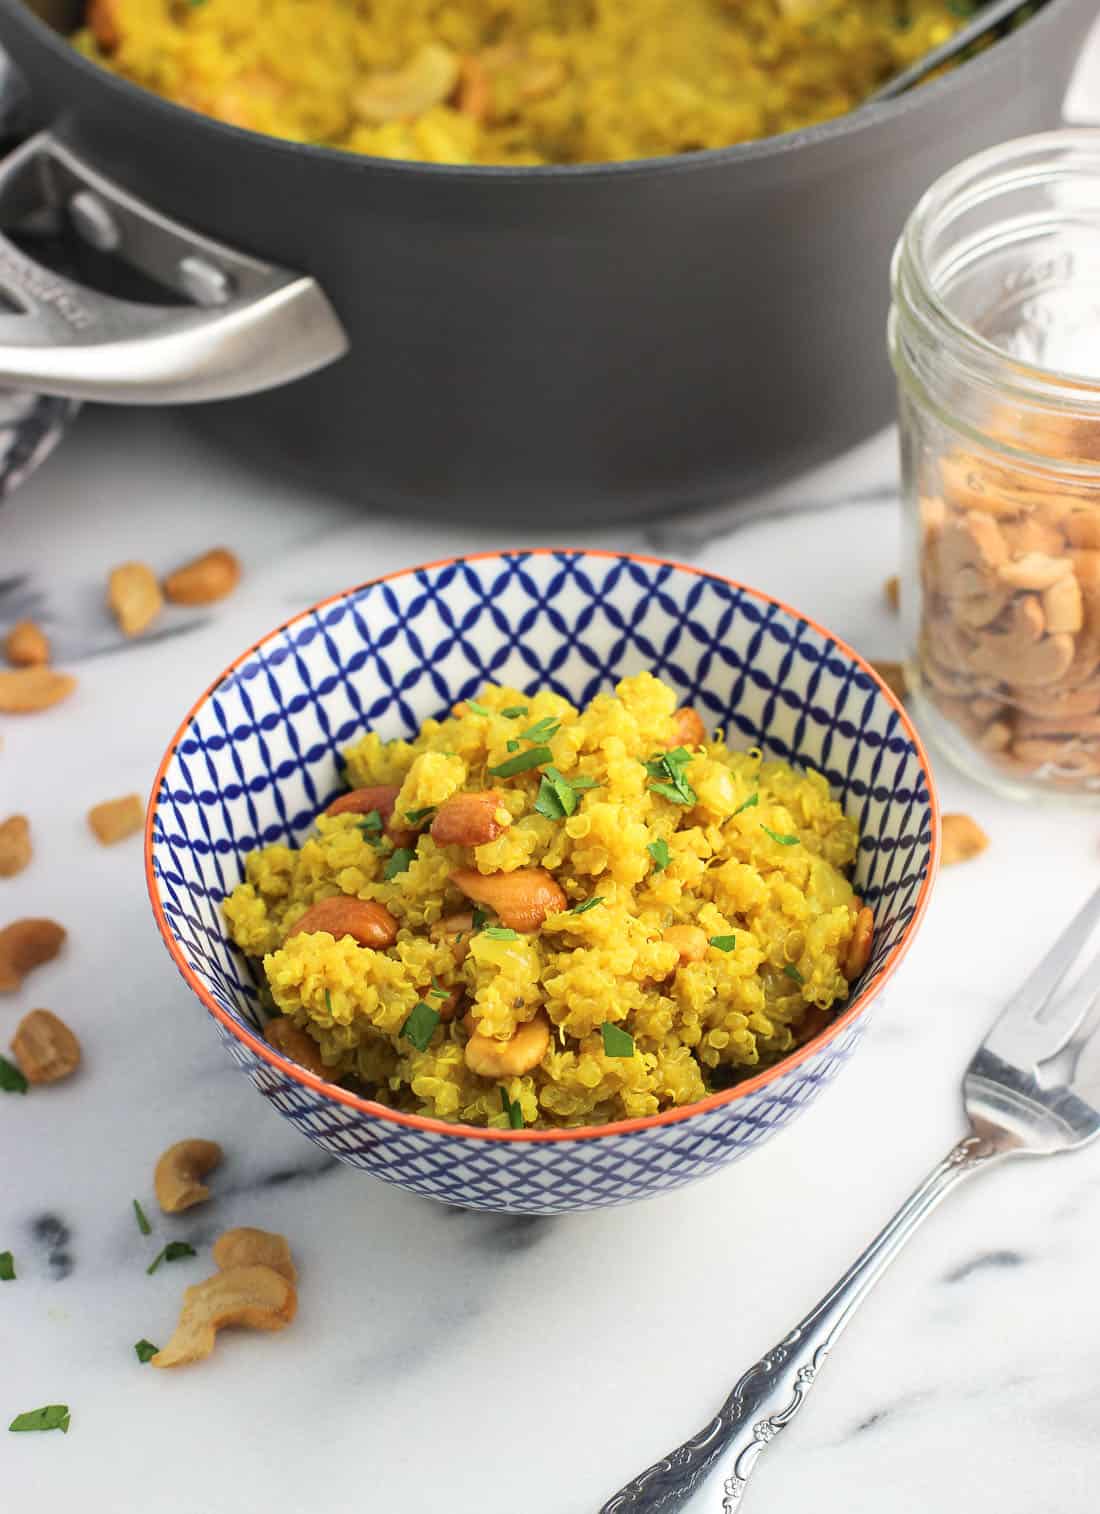 Coconut turmeric quinoa is a flavorful and healthy side dish recipe, made with creamy coconut milk and broth and mixed with cashews and fresh herbs.